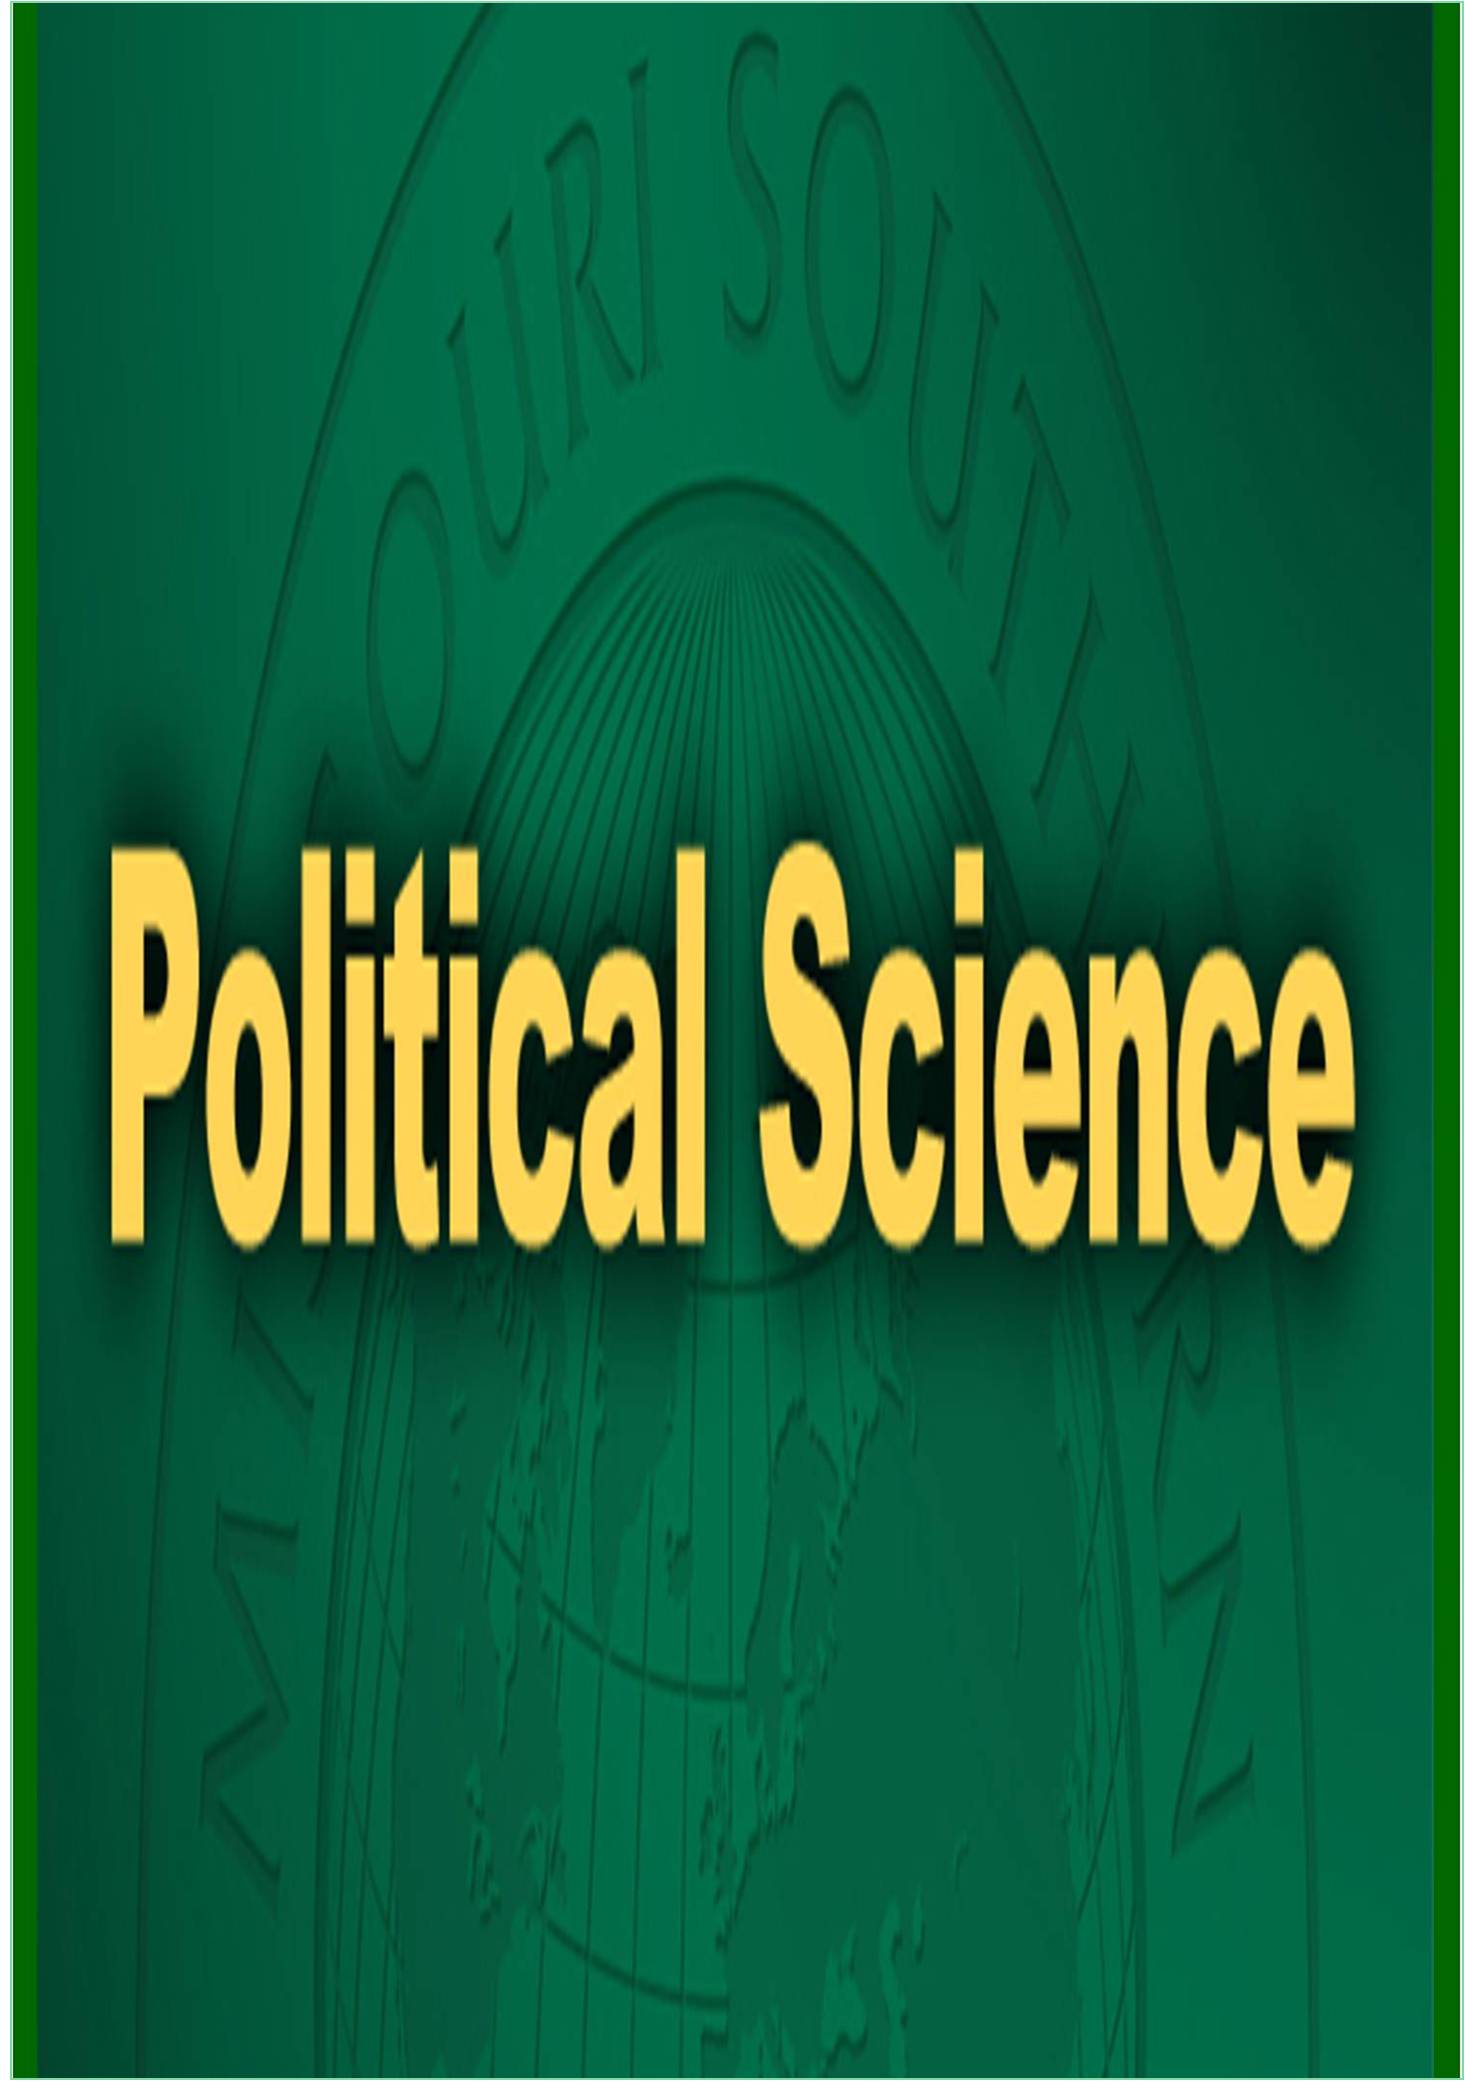 global-journal-of-political-science-and-election-tribunal-banner.jpg